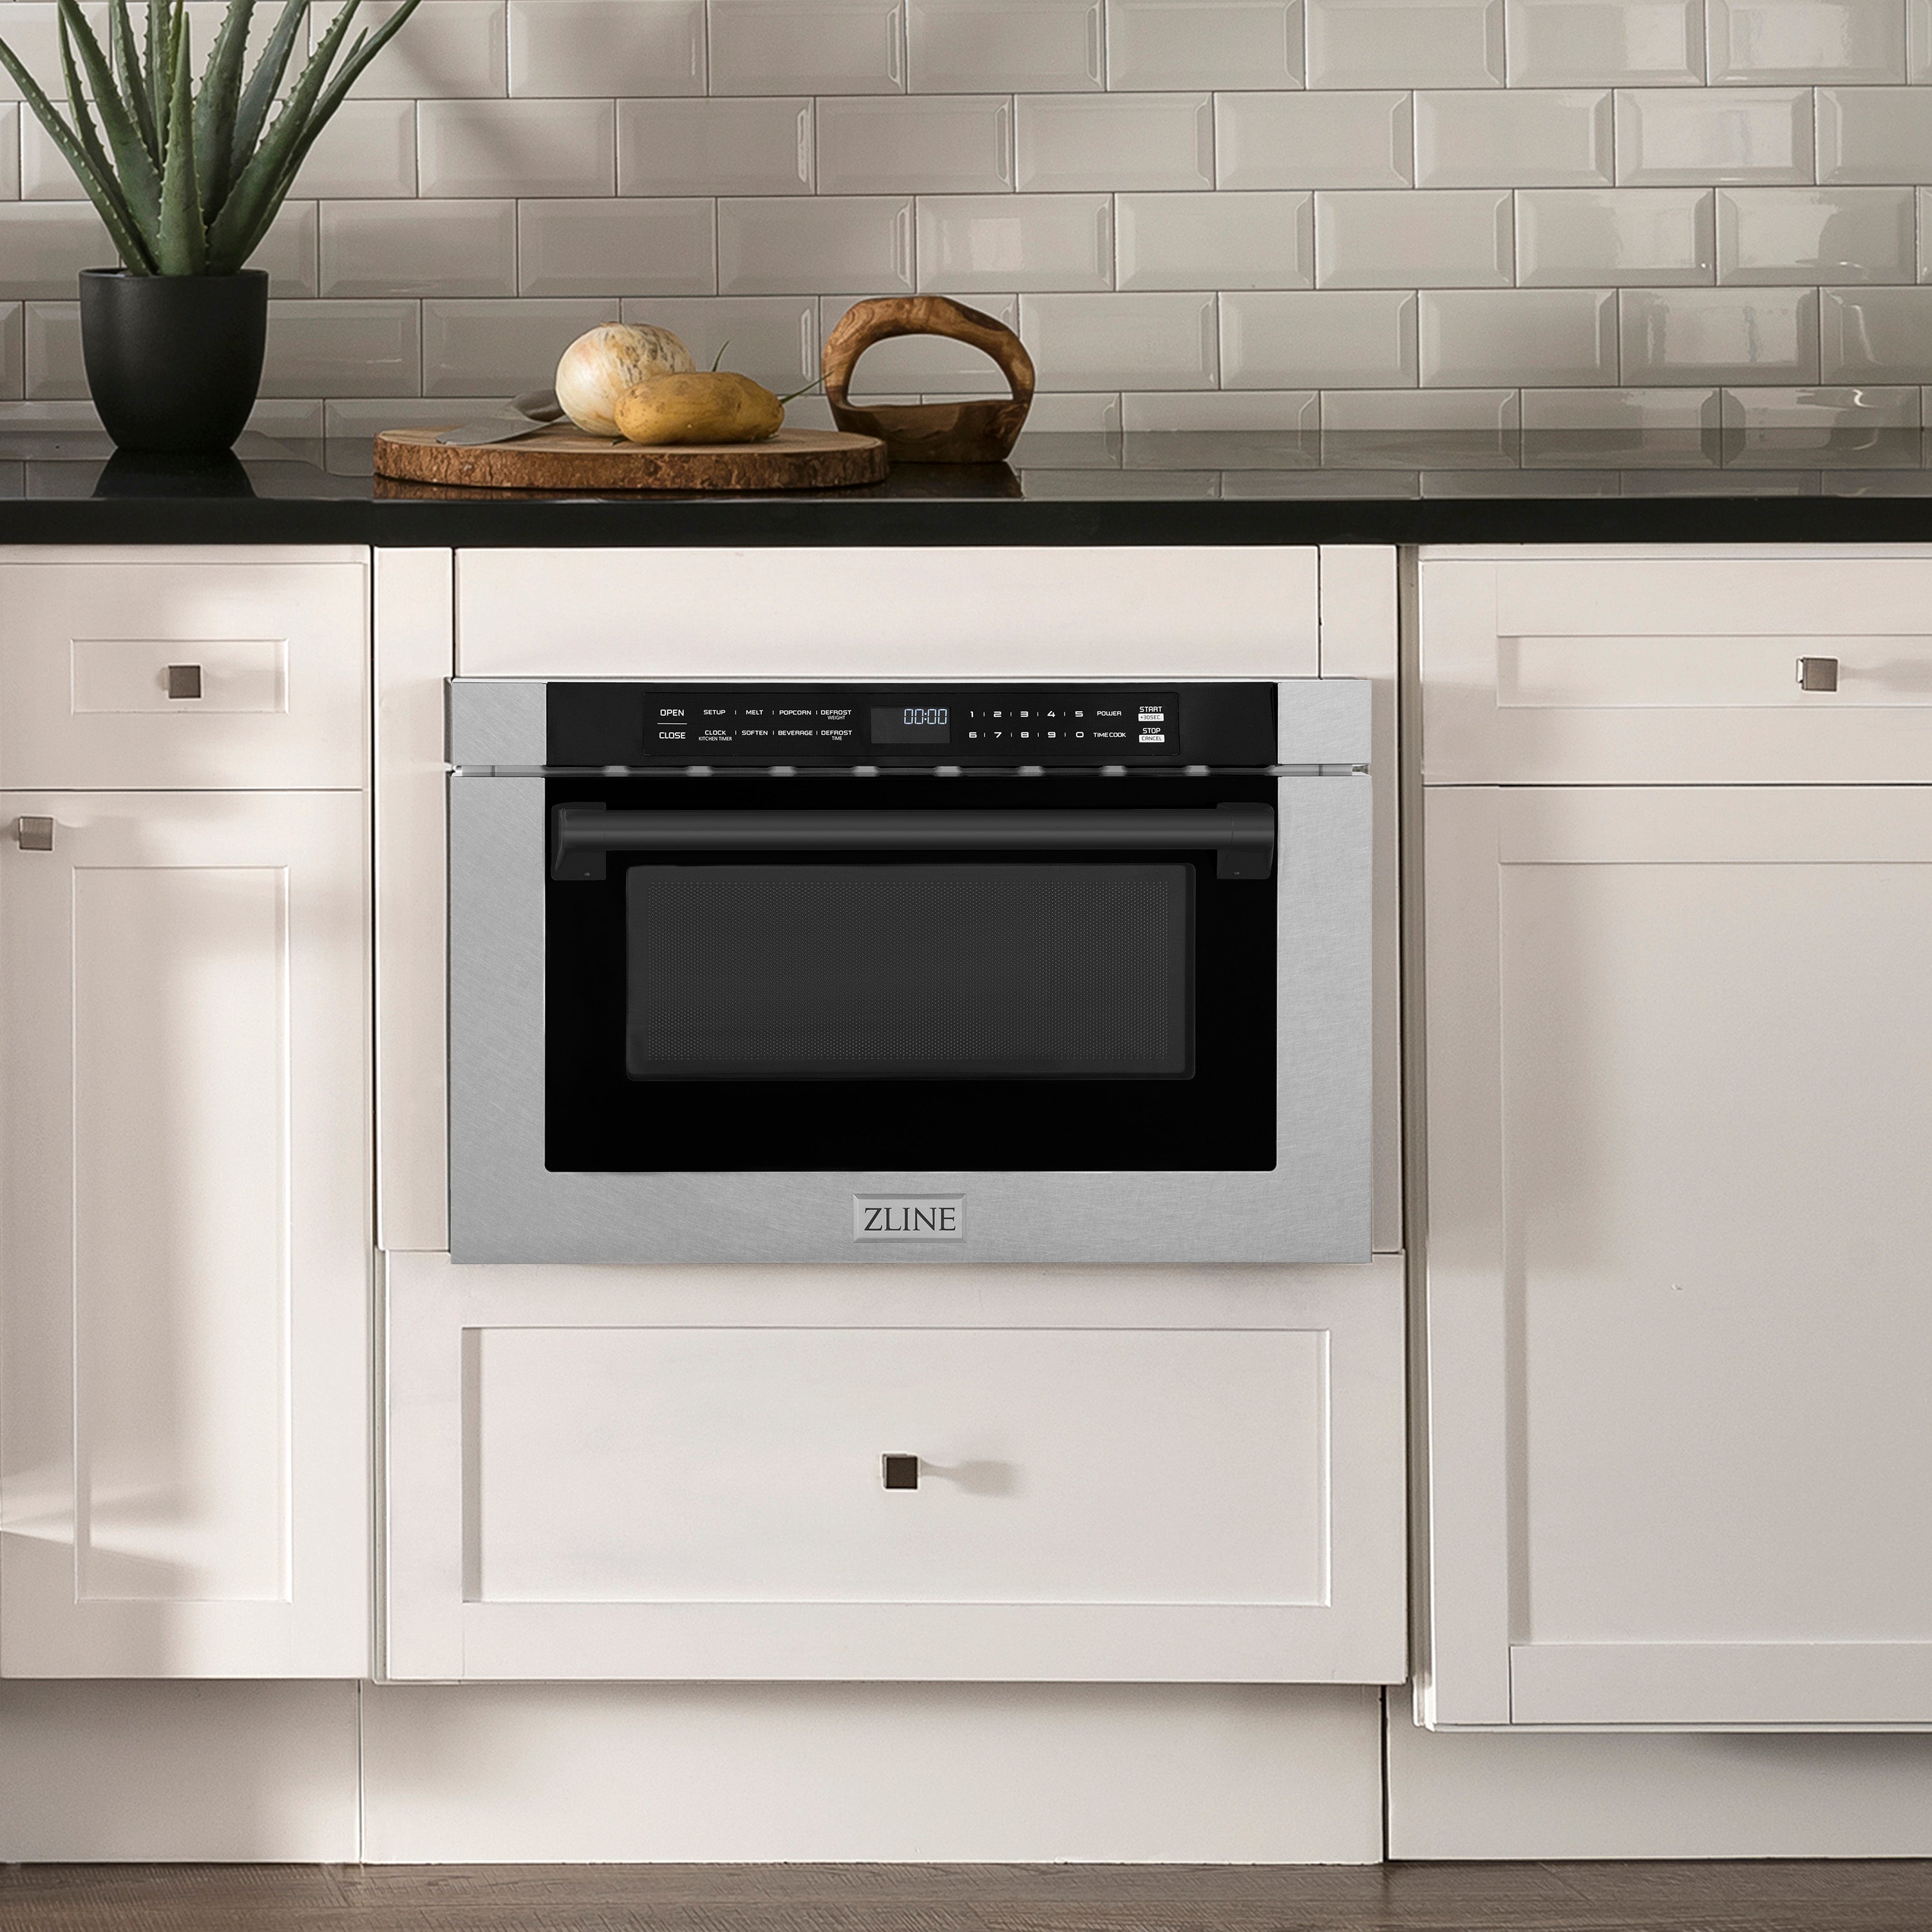 ZLINE Autograph Edition 24 in. Microwave in Fingerprint Resistant Stainless Steel with Traditional Handles and Matte Black Accents (MWDZ-1-SS-H-MB) in Rustic Farmhouse Style Kitchen with white cabinets and black countertops.